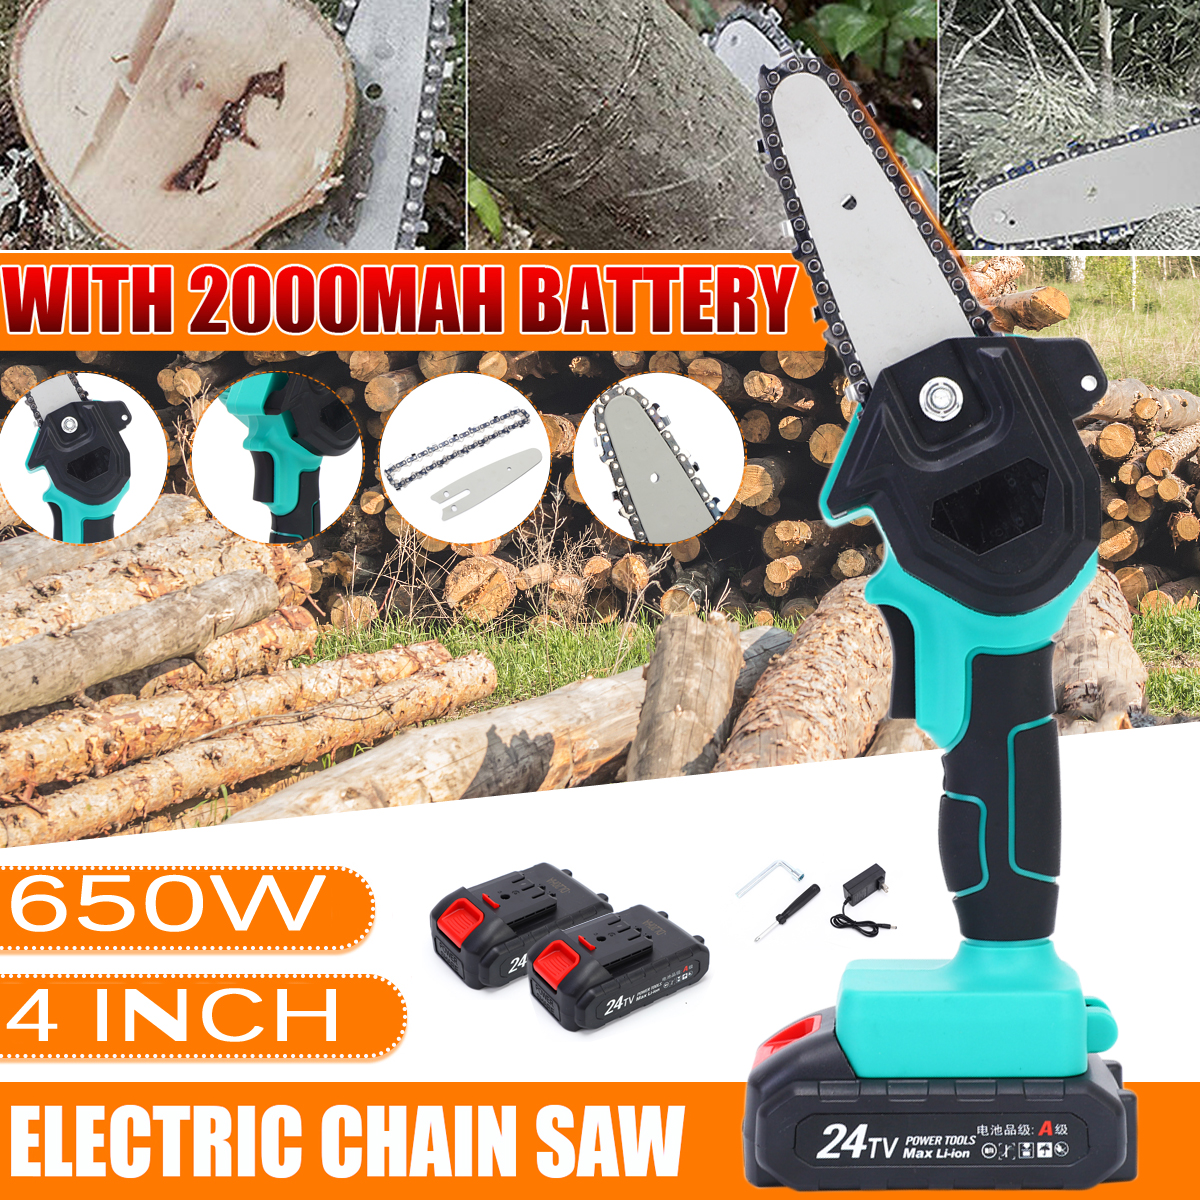 220V-Mini-Chainsaw-Cordless-Electric-Portable-Saw-Hand-held-Rechargeable-Electric-Logging-Saw-With-B-1787028-1